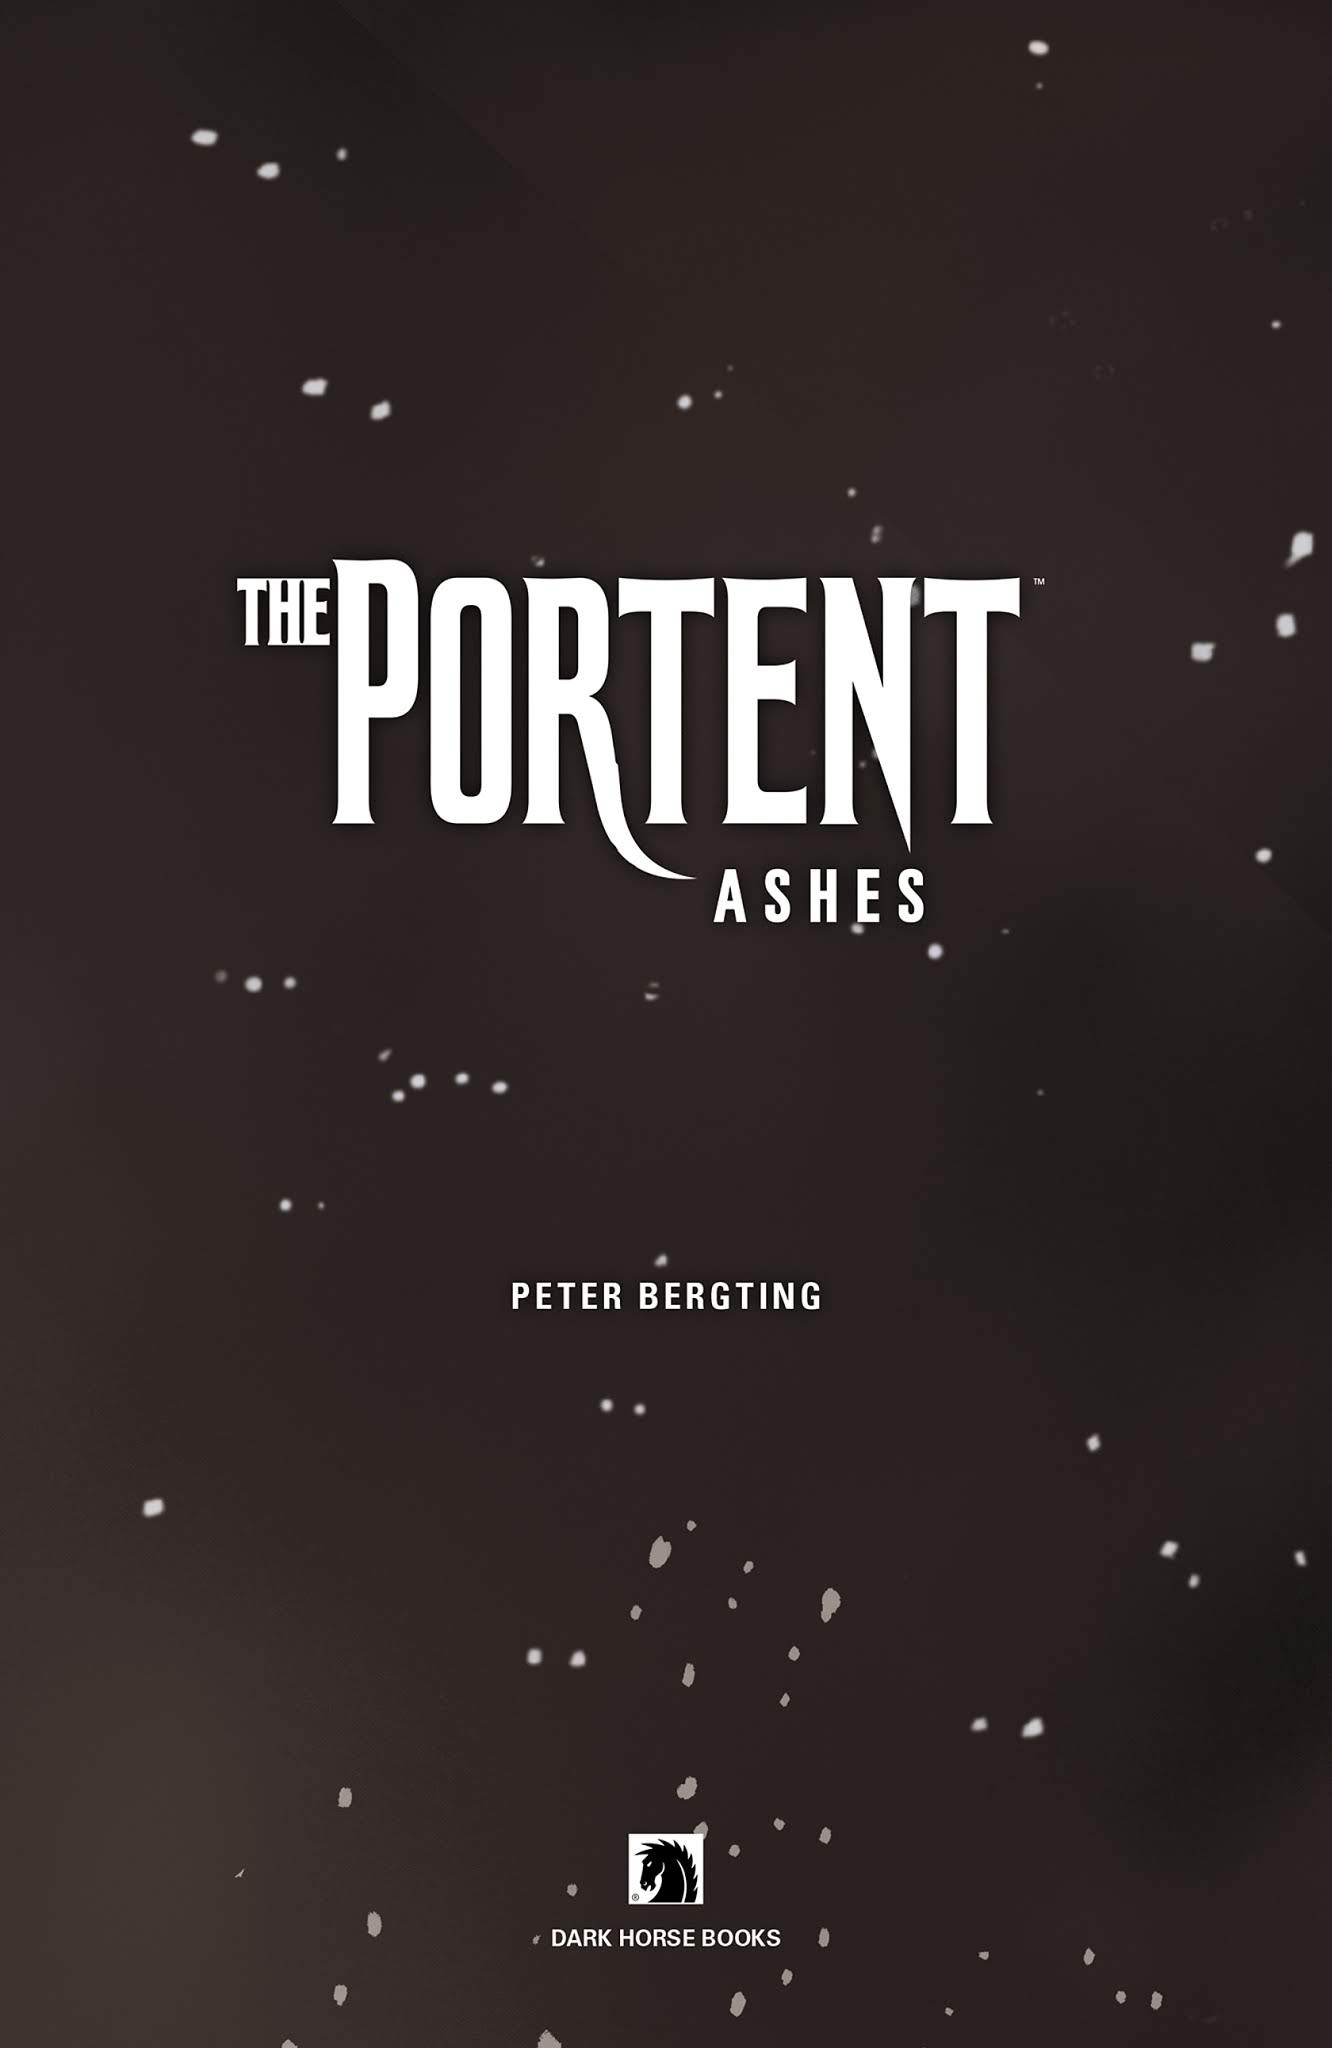 Read online The Portent: Ashes comic -  Issue # TPB - 4